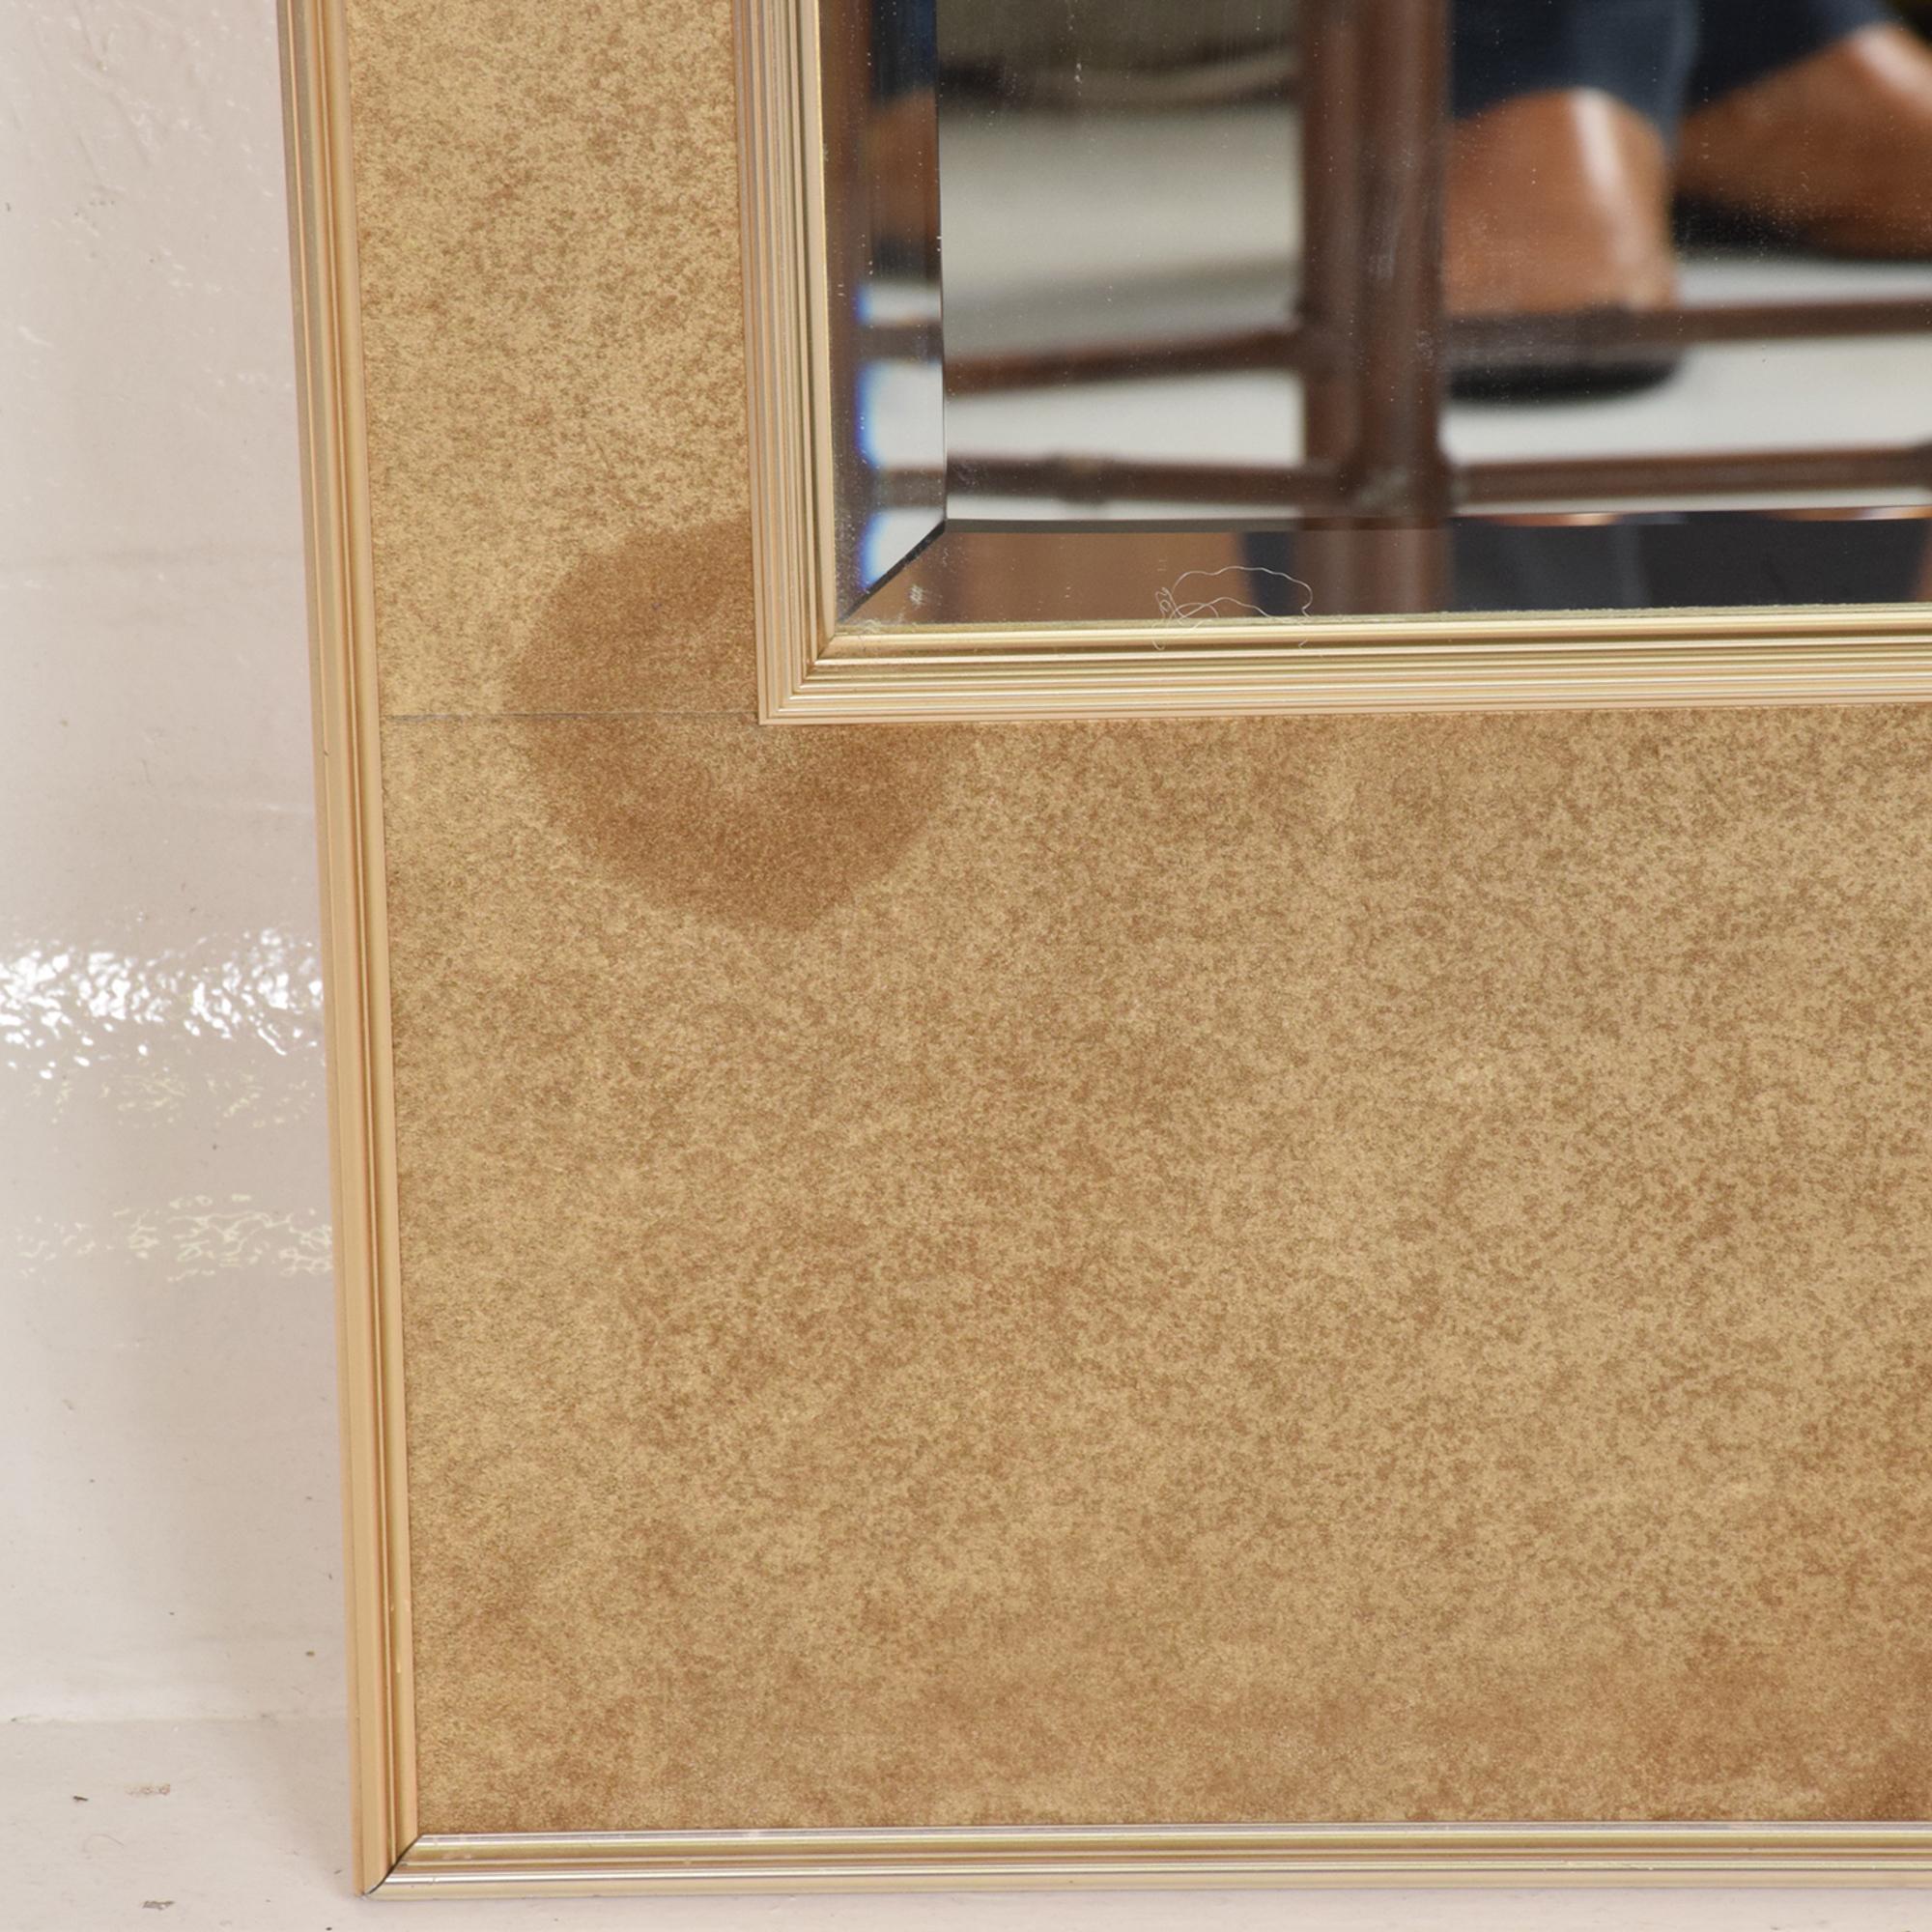 Late 20th Century La Barge Italian Suede Leather Framed Wall Mirror 1970s Modern Vintage